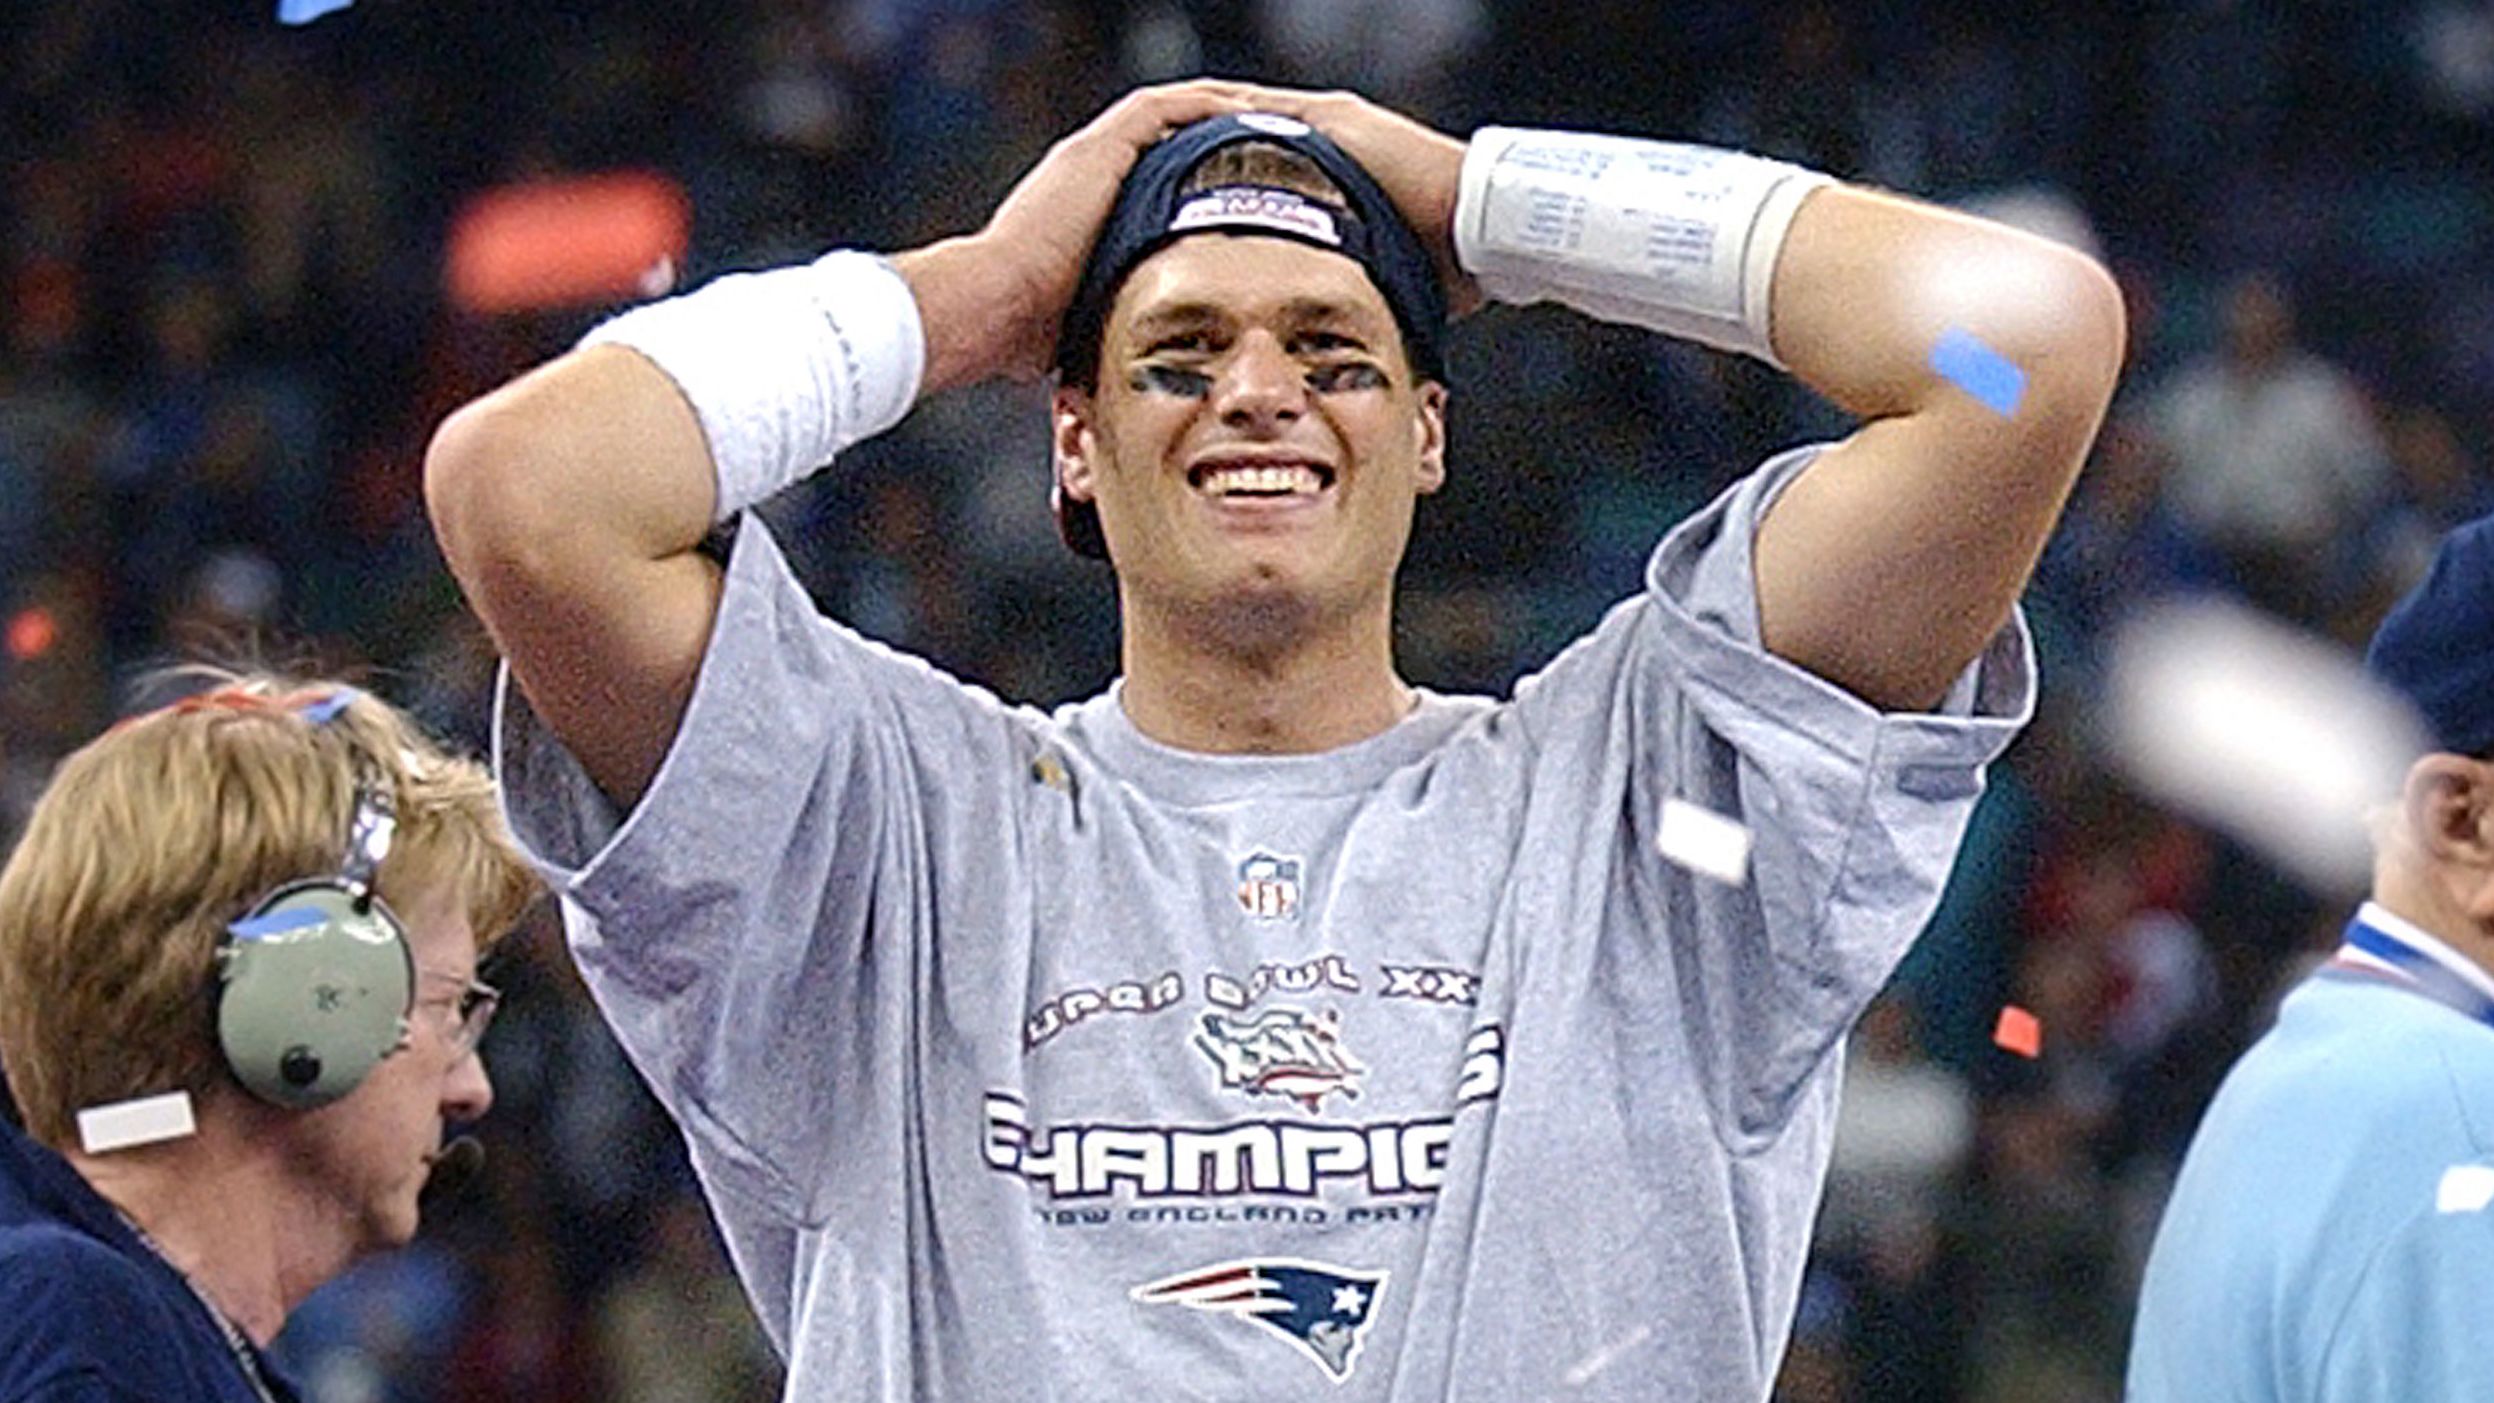 <strong>Super Bowl XXXVI (2002):</strong> A star was born in Super Bowl XXXVI as second-year quarterback Tom Brady led the New England Patriots to an upset victory over the heavily favored St. Louis Rams. Brady threw for 145 yards and a touchdown as the Patriots won 20-17 on a last-second field goal by Adam Vinatieri.